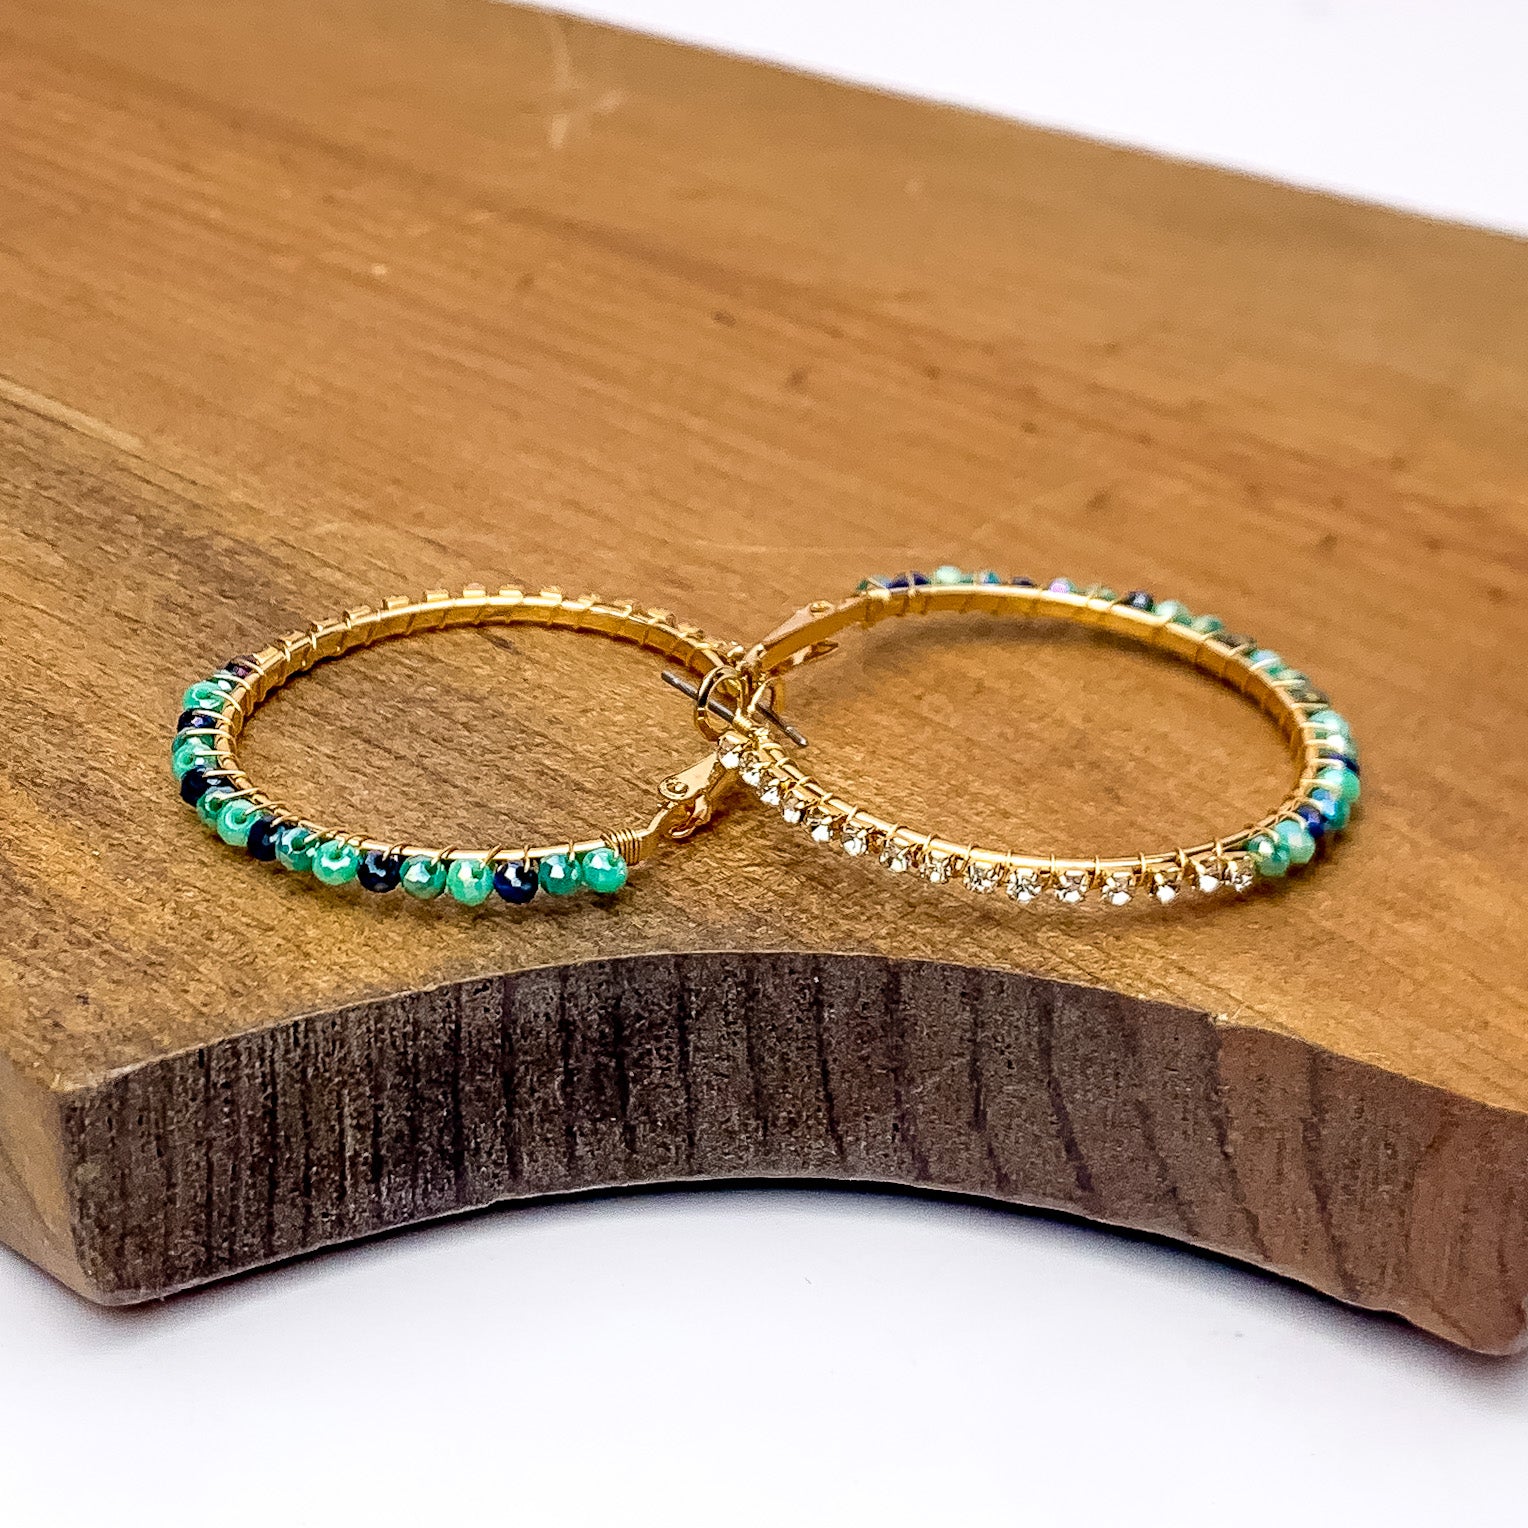 Gold Tone Hoop Earrings Wrapped in Clear and Blue Crystals - Giddy Up Glamour Boutique